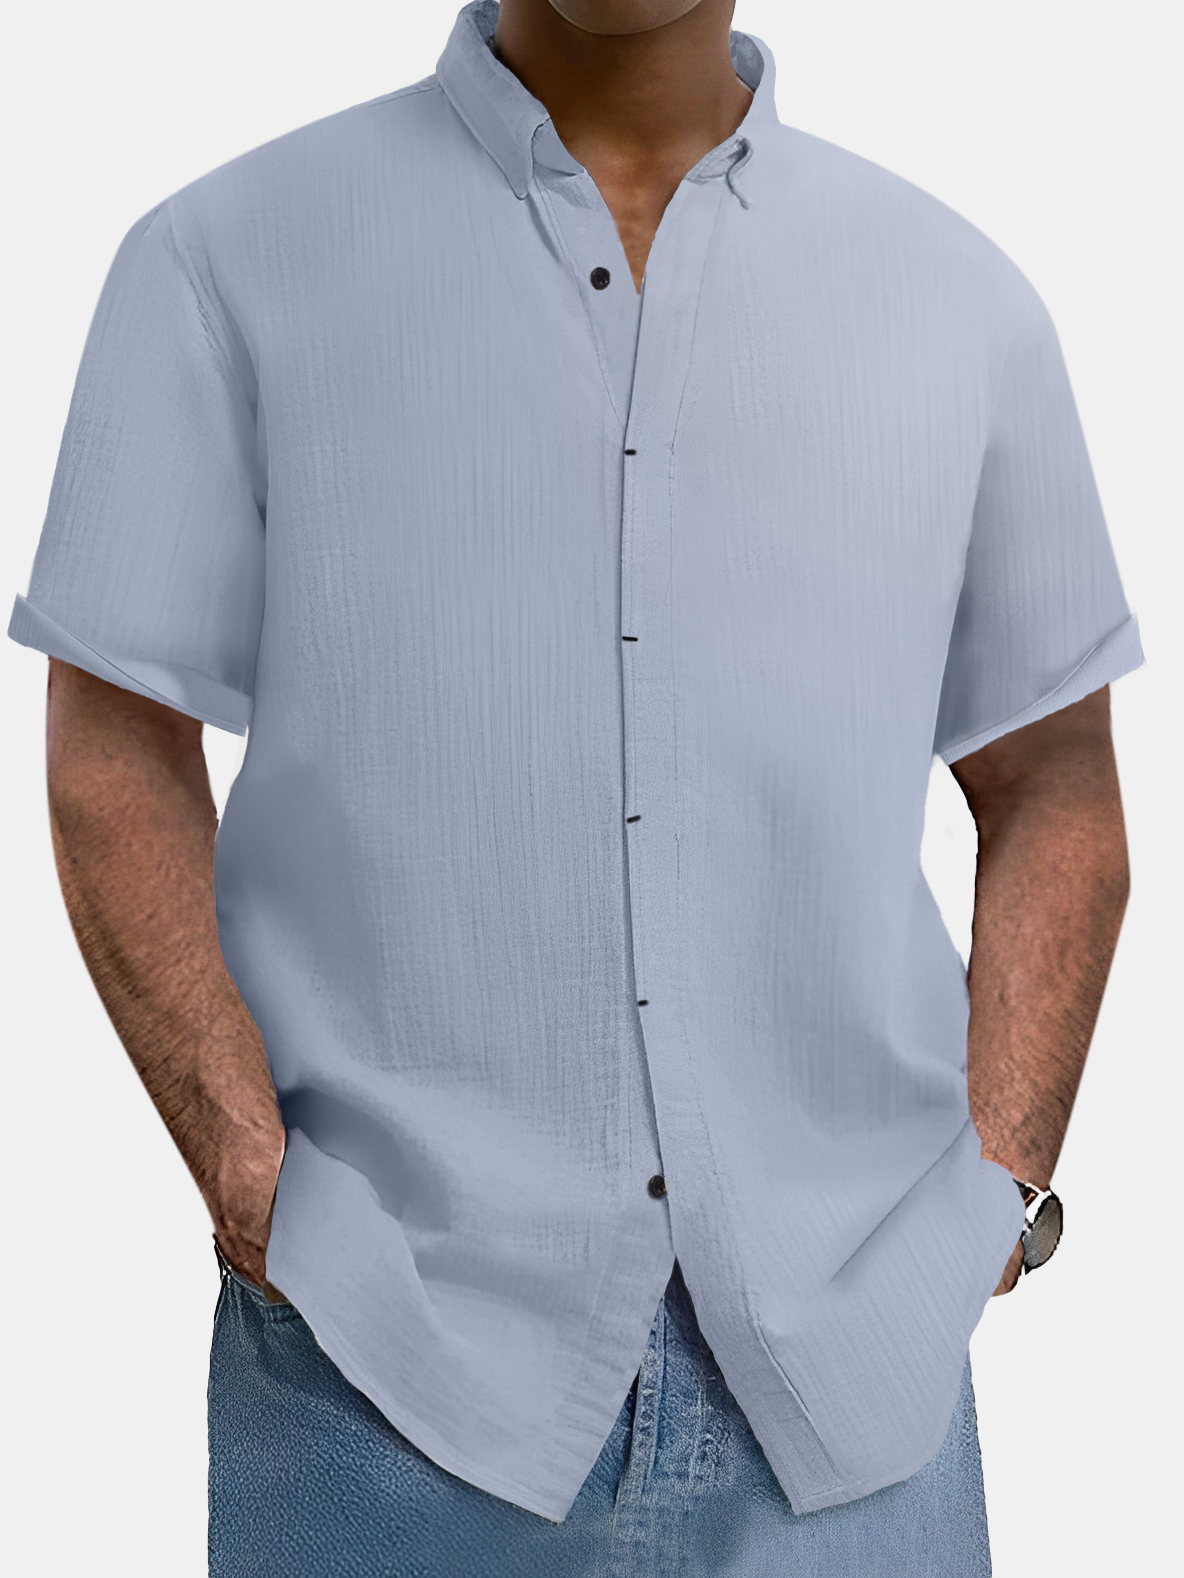 Men's comfortable solid color cotton and linen short-sleeved shirt